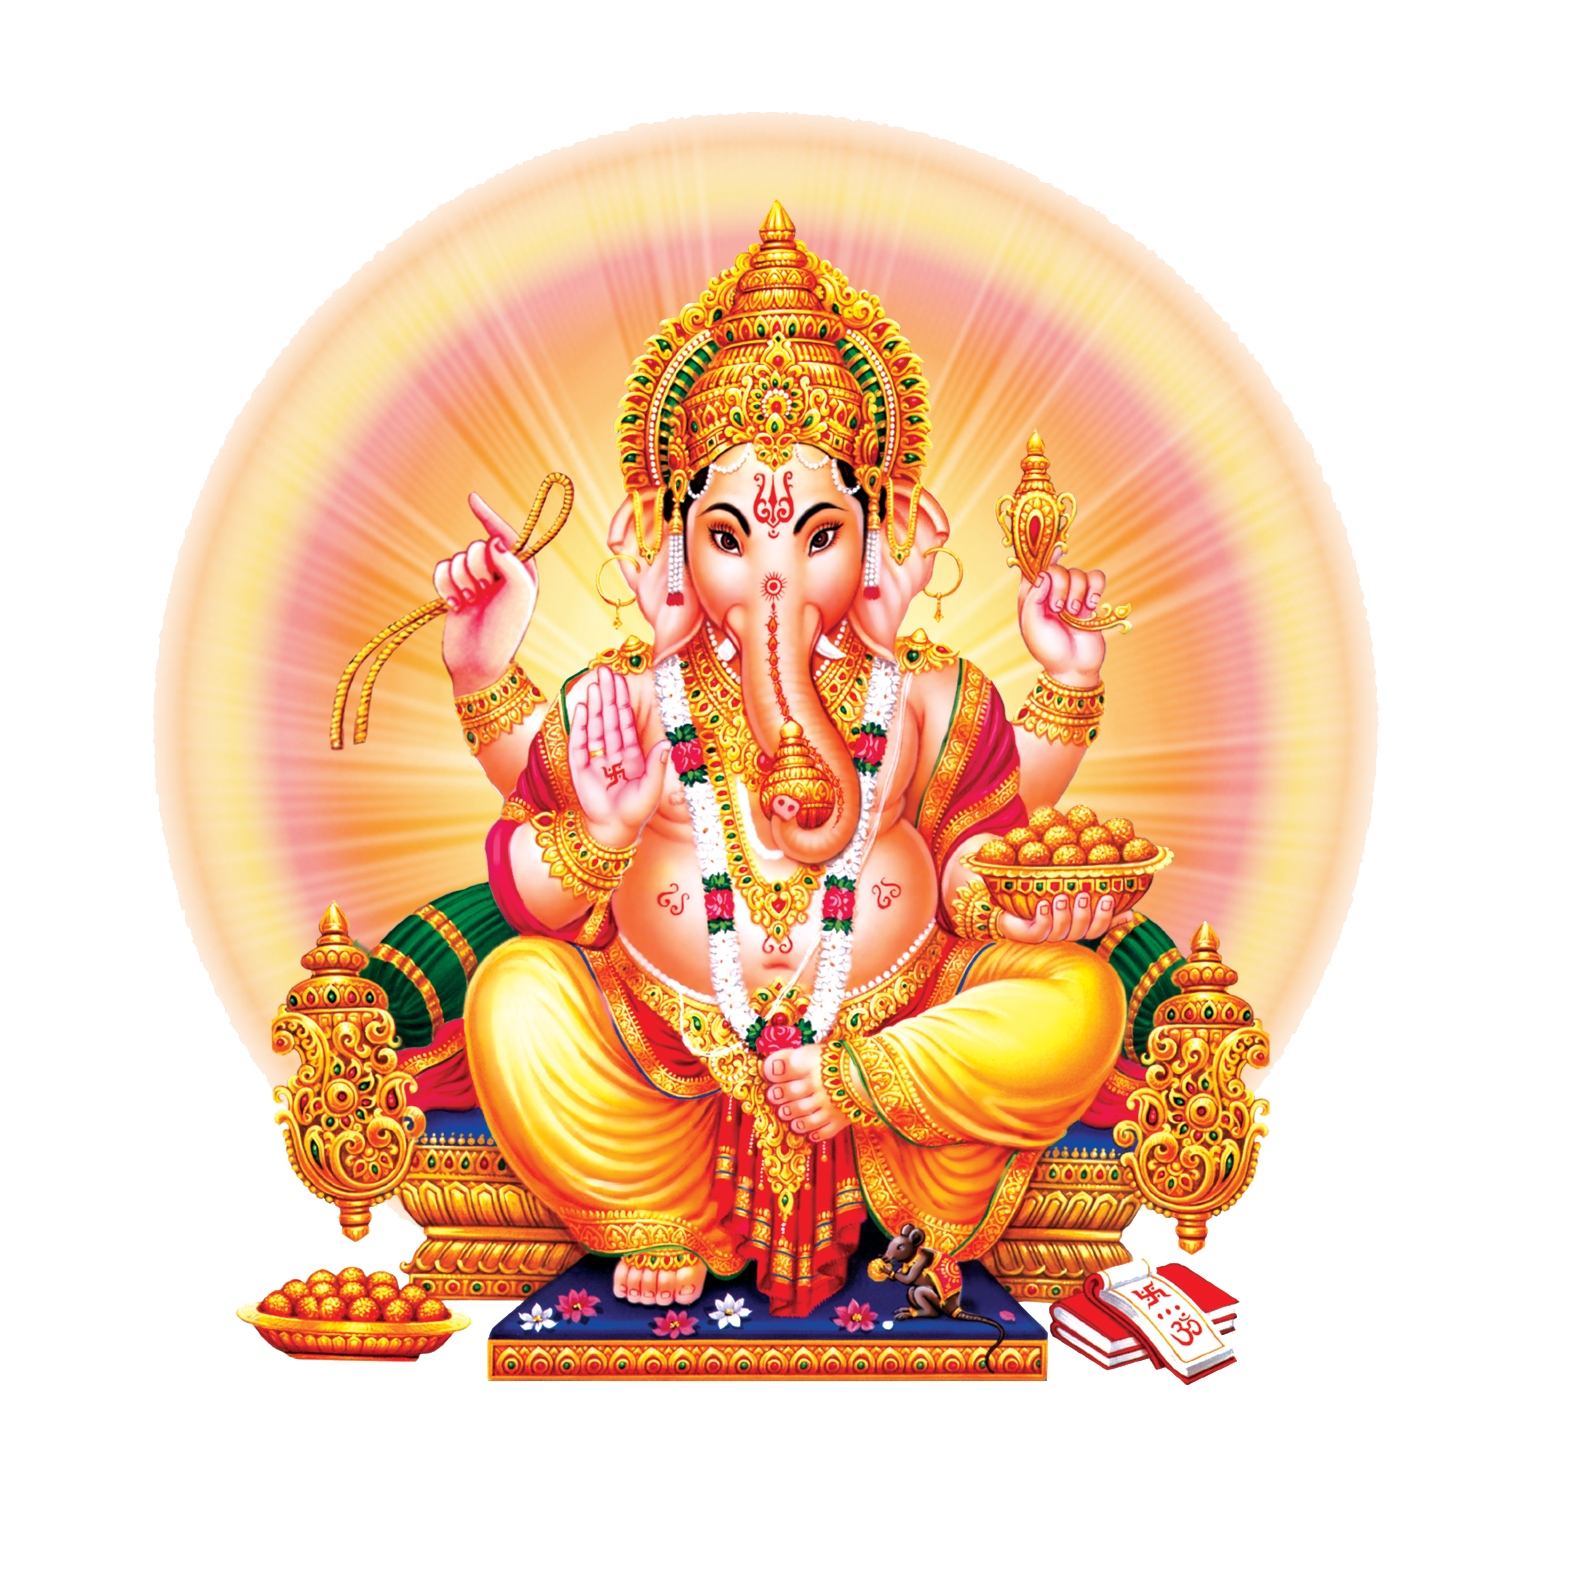 Lord Ganesha Wallpapers Hd For Mobile Free Download